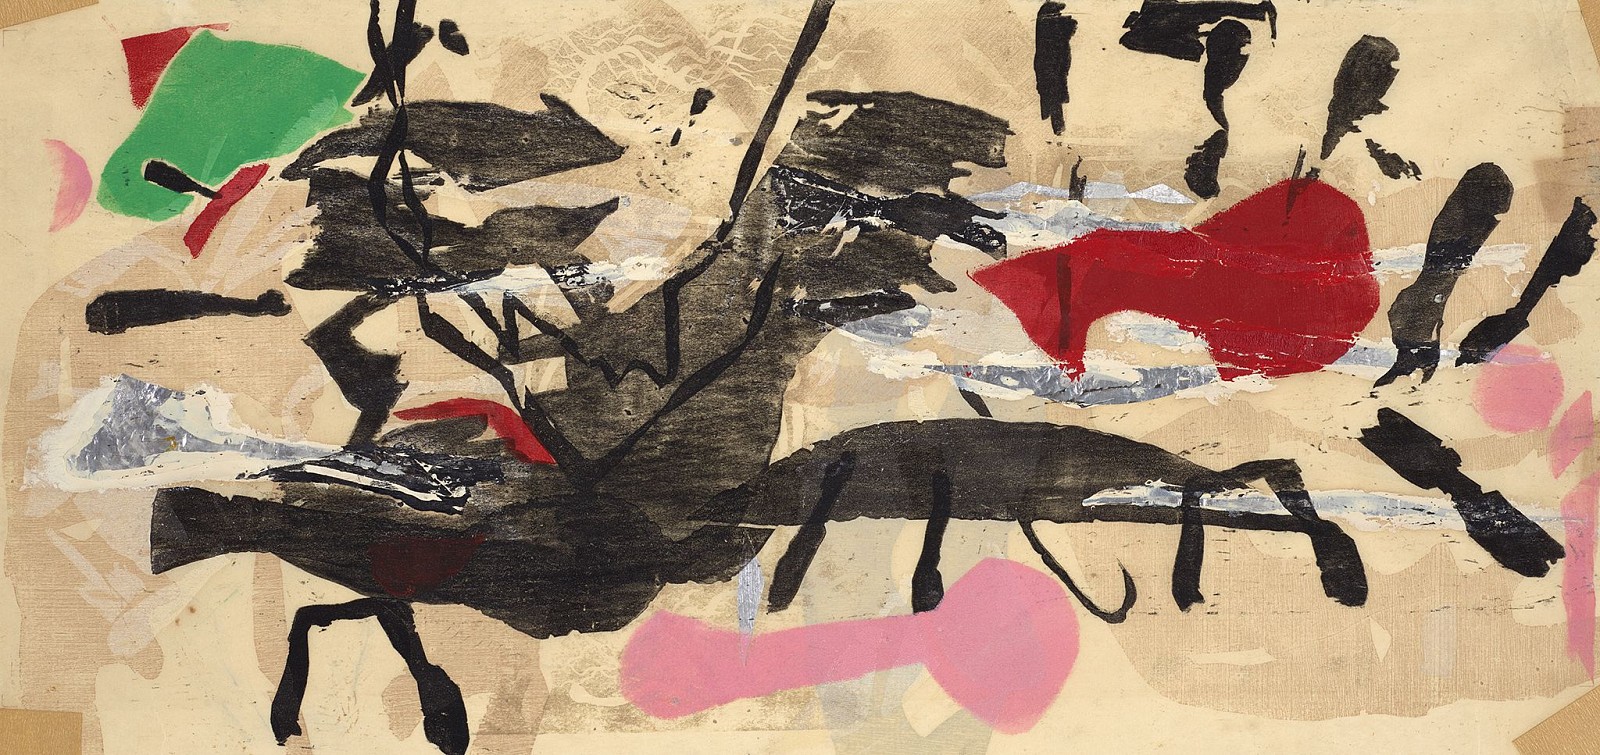 Perle Fine, Printed Collage #2 | SOLD, 1959
Woodcut on cream Japan paper with gouache and foil, 12 x 25 3/8 in. (30.5 x 64.5 cm)
FIN-00120